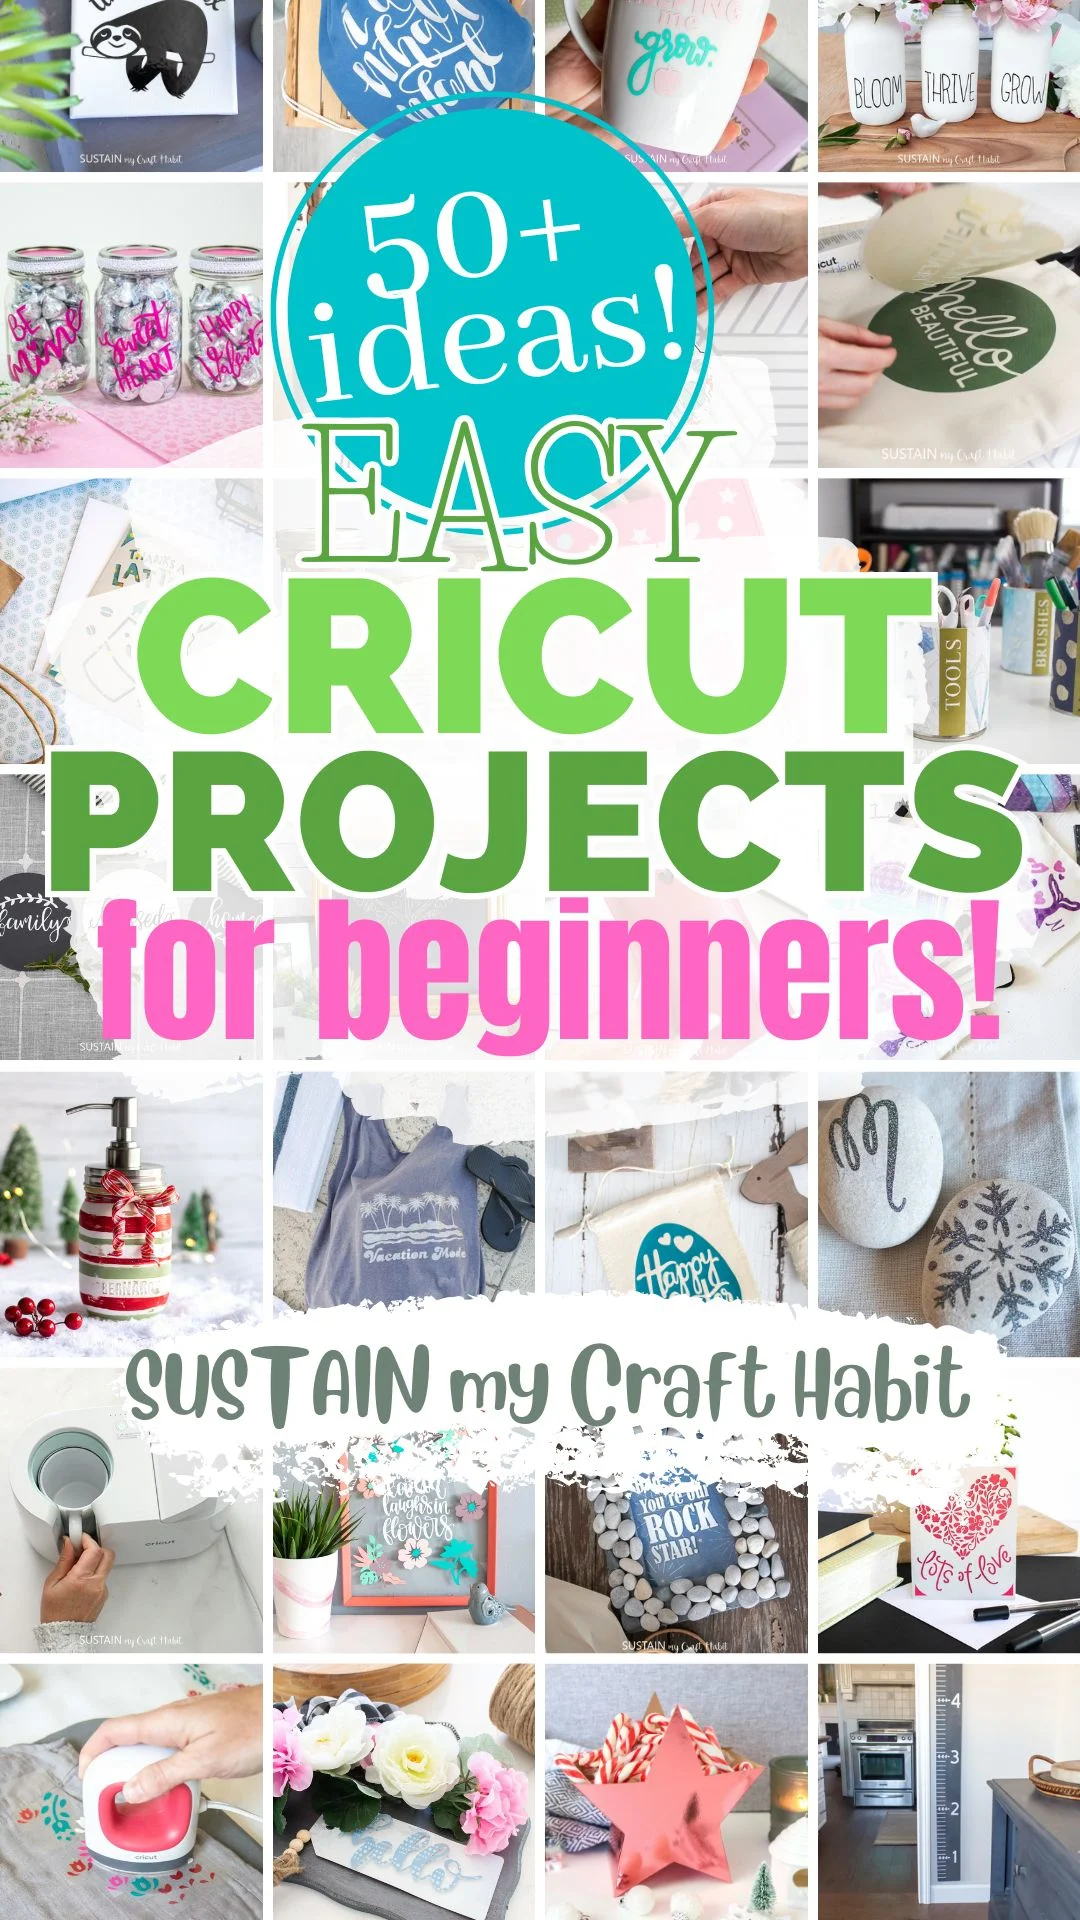 25+ Cutting Board Upcycling/Repurposing Projects - Organized Clutter